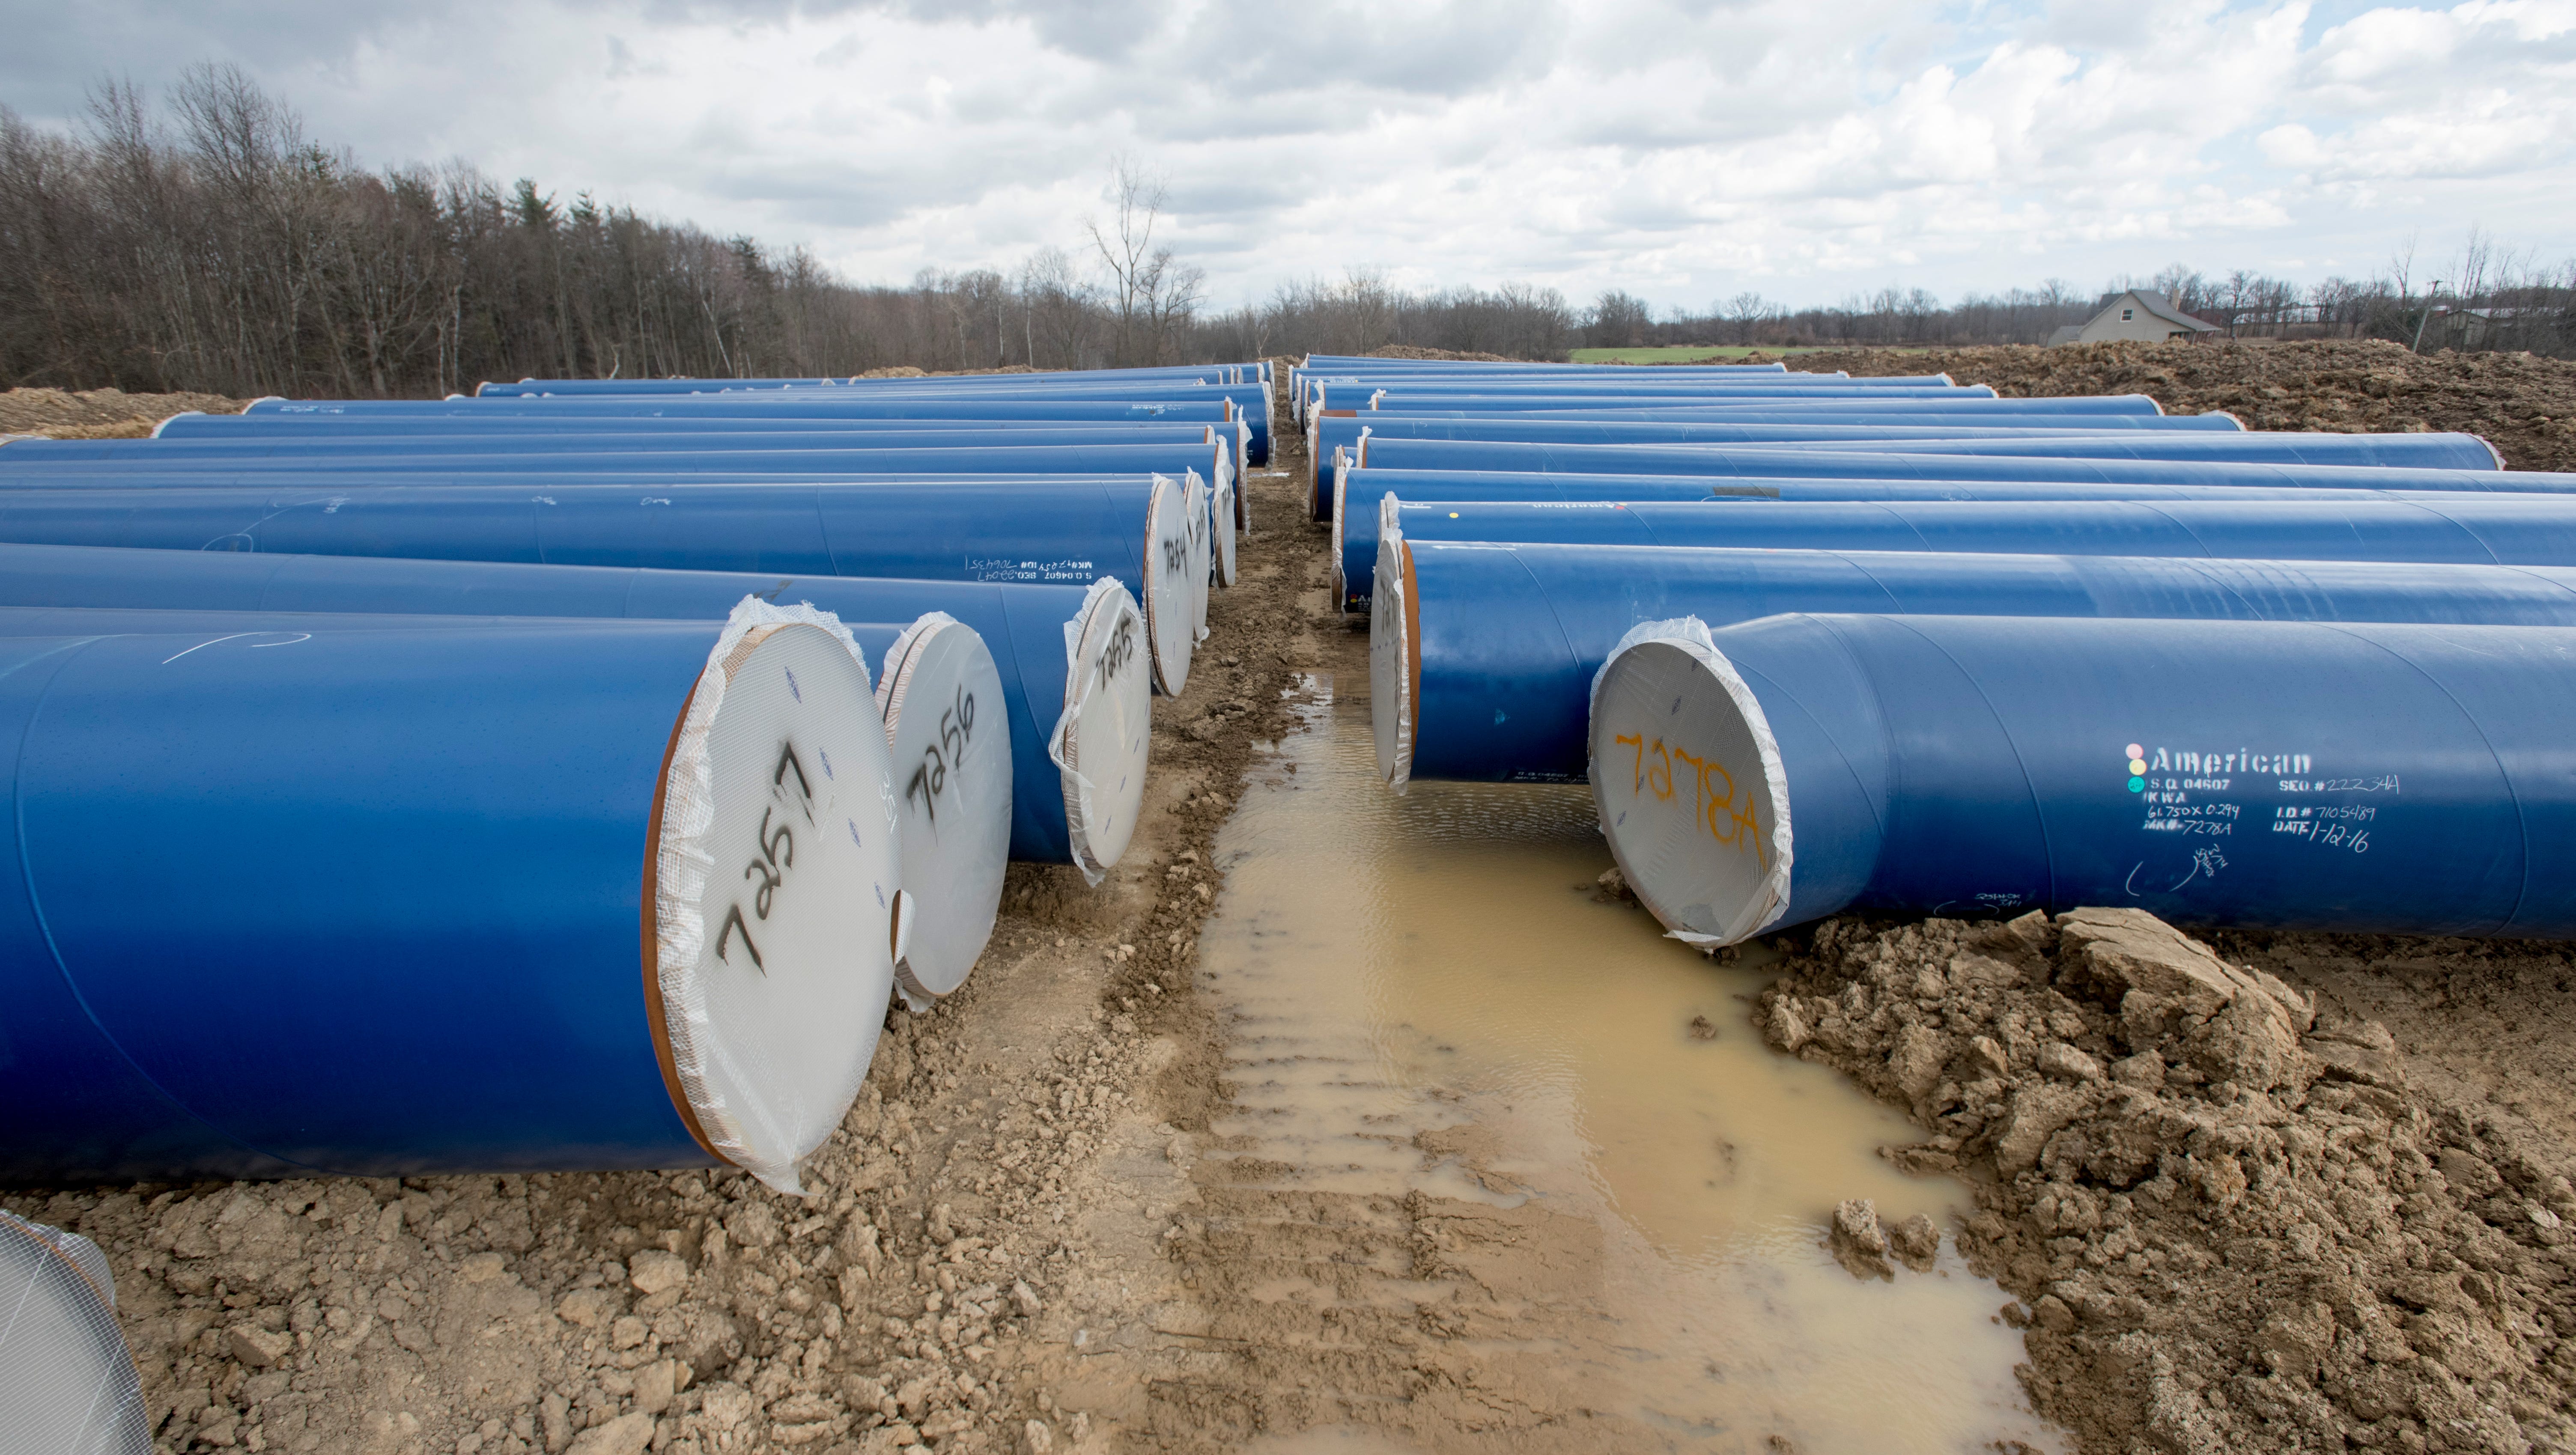 Several 50-foot-long sections of pipe wait in a field to be added to the Karegnondi Water Authority pipeline.